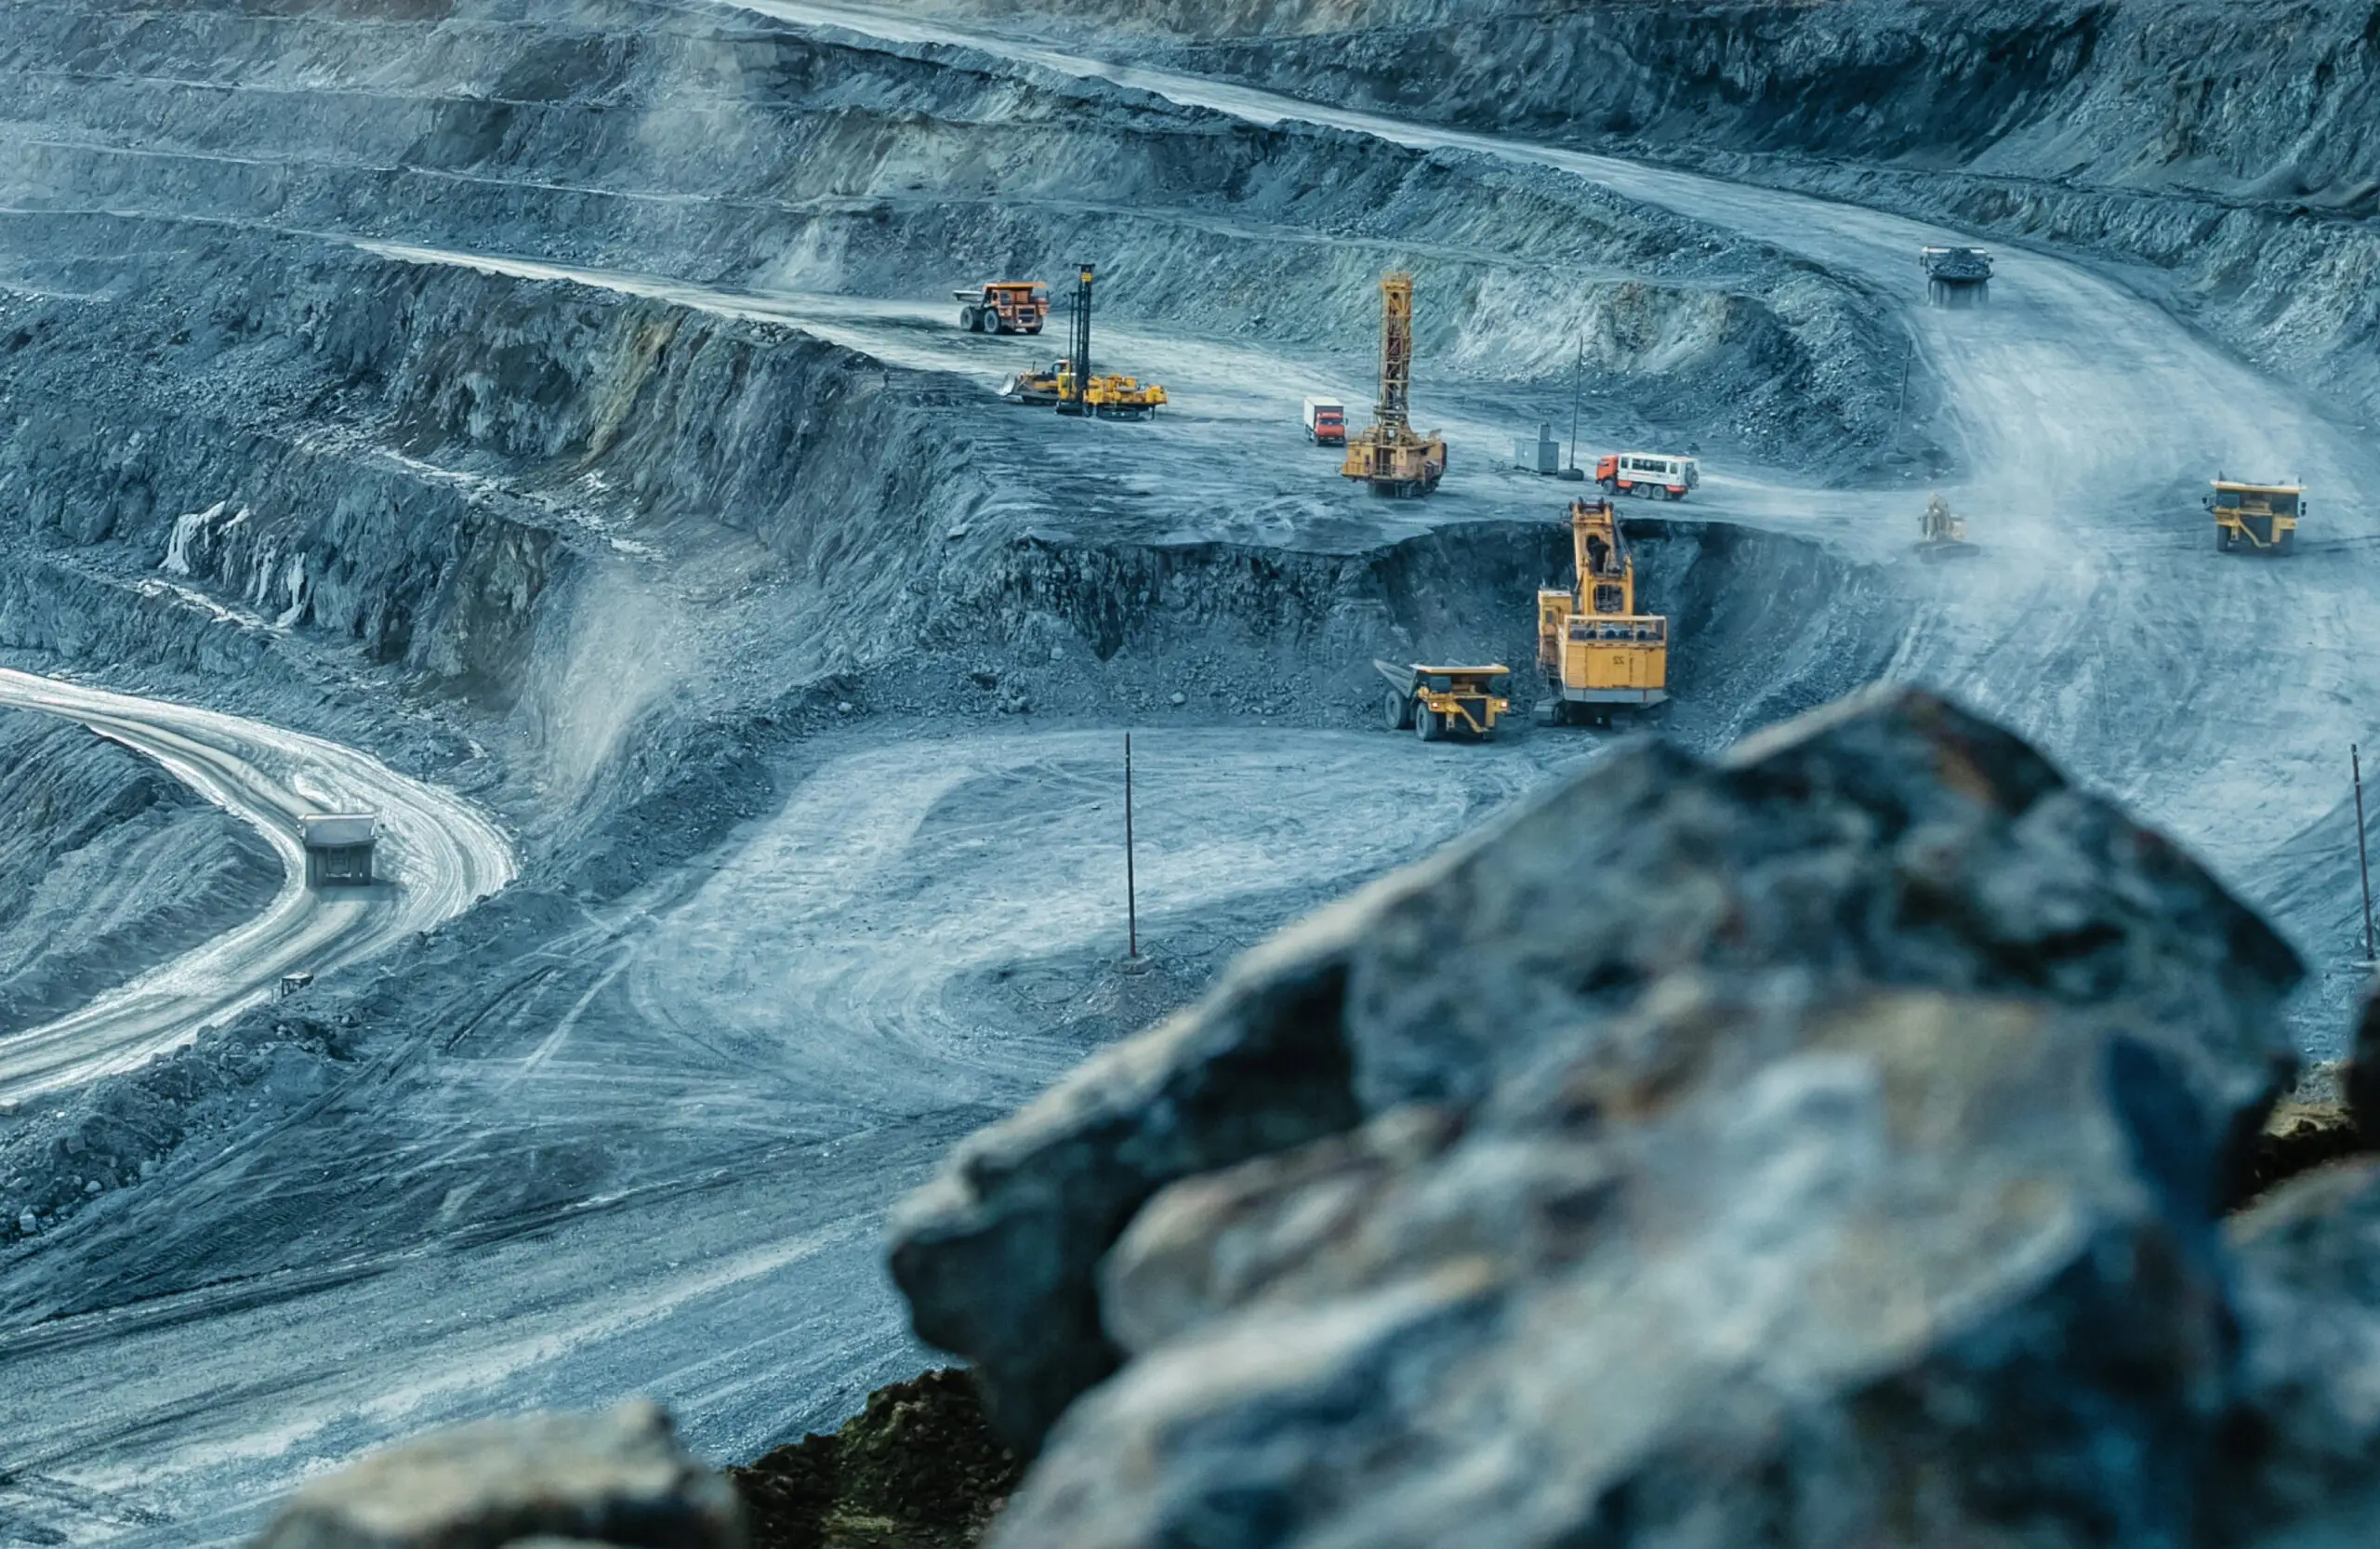 Top 10 largest mines in the world